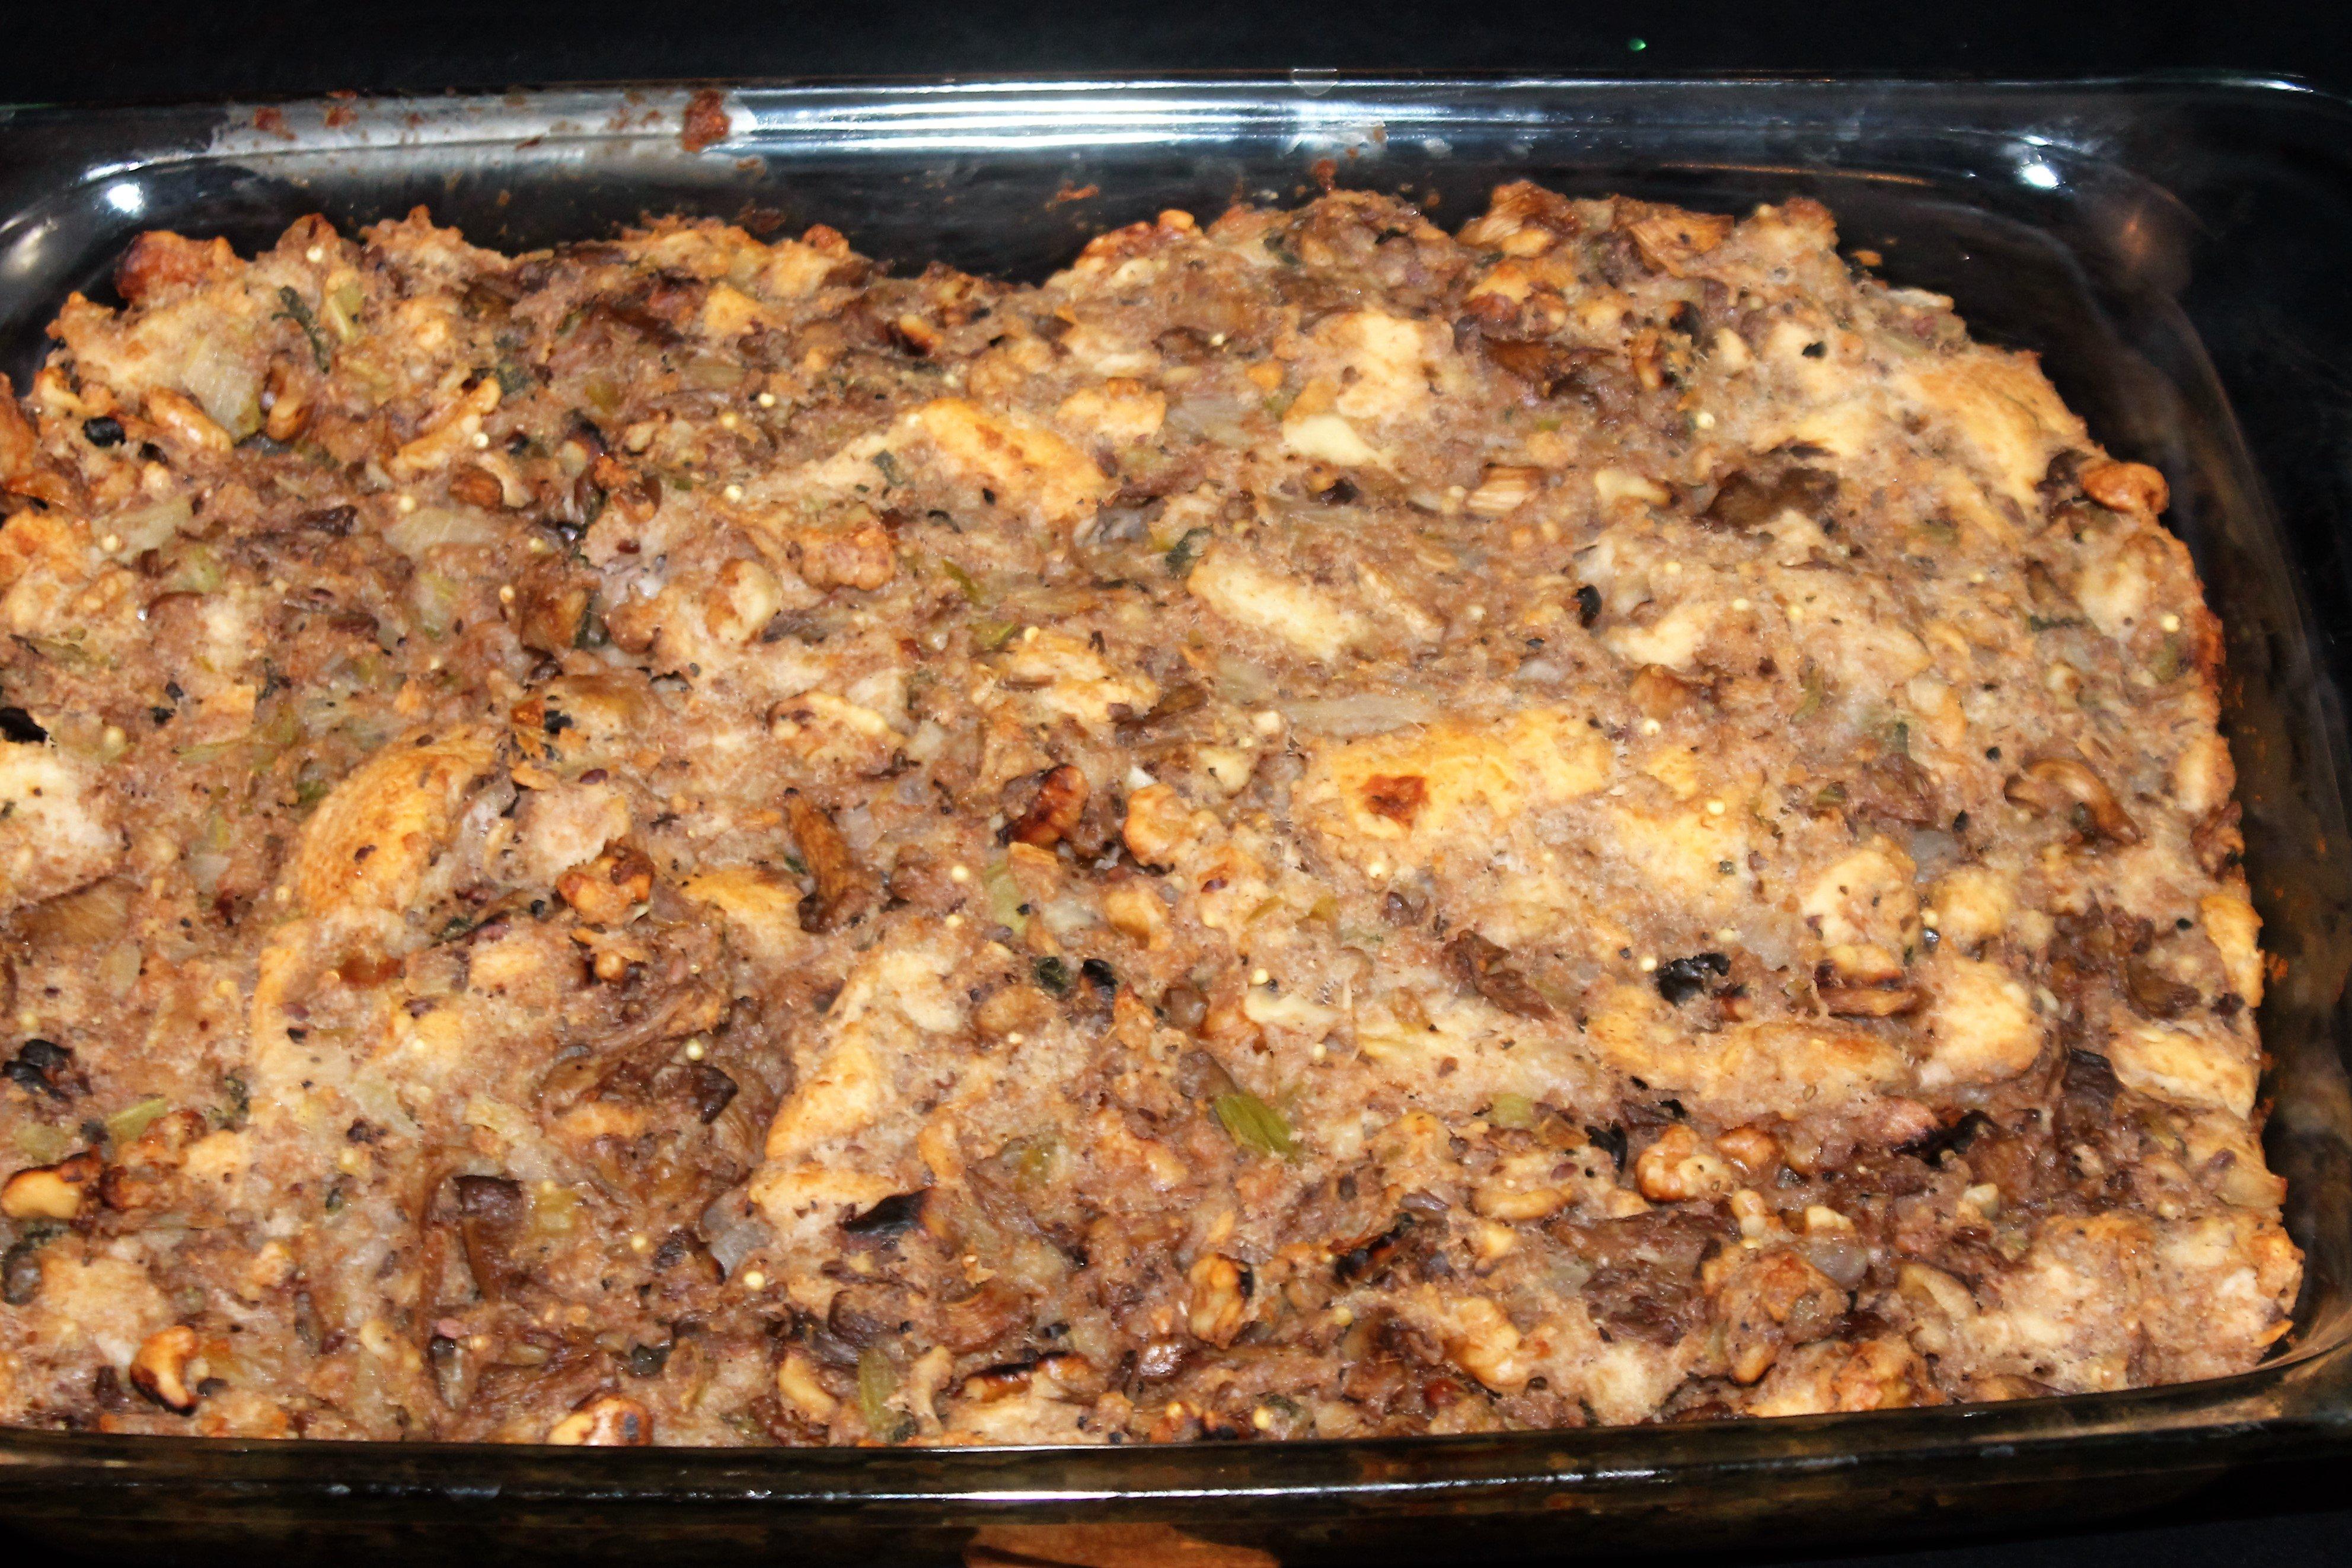 A pan full of Wild Mushroom and Walnut Stuffing is perfect for a Thanksgiving meal.